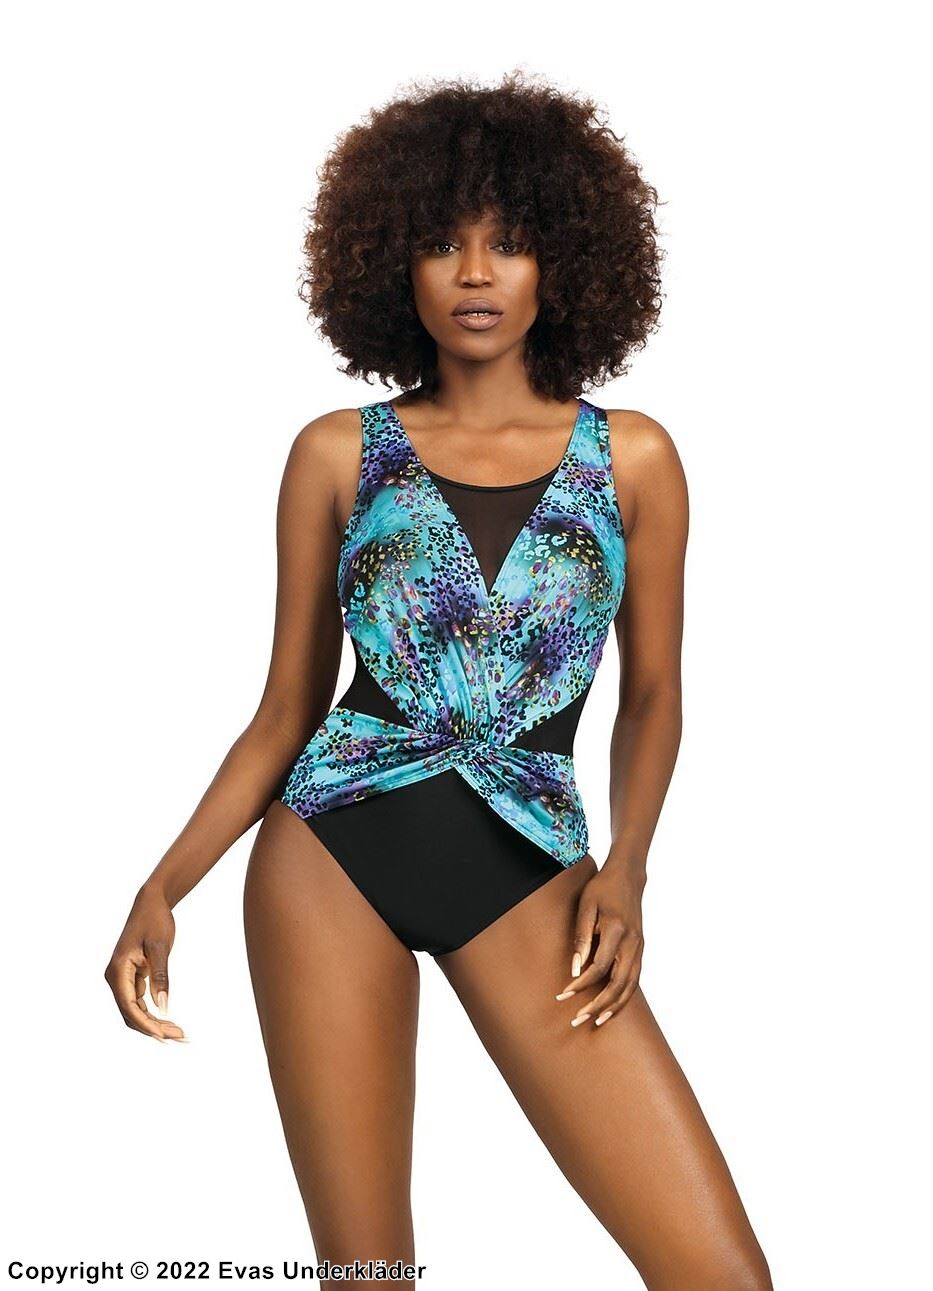 One-piece swimsuit, wide shoulder straps, mesh inlay, wrinkles, colorful leopard